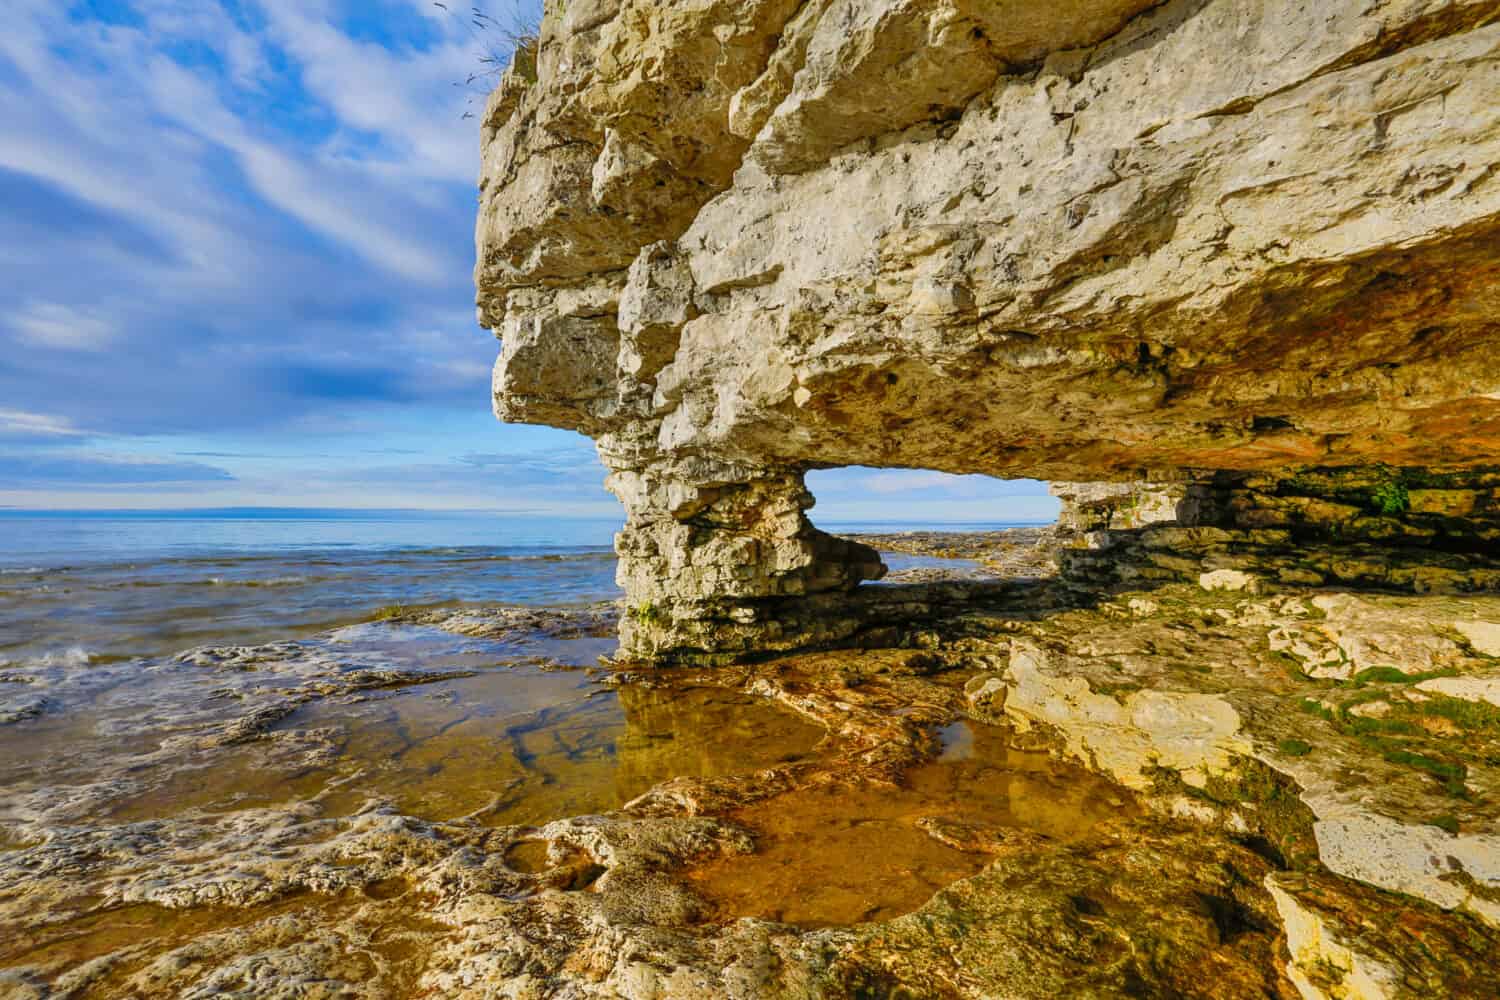 A rock arch window has been eroded by the waves at Door County, Wisconsin's Cave Point  with a cloudy blue sky.